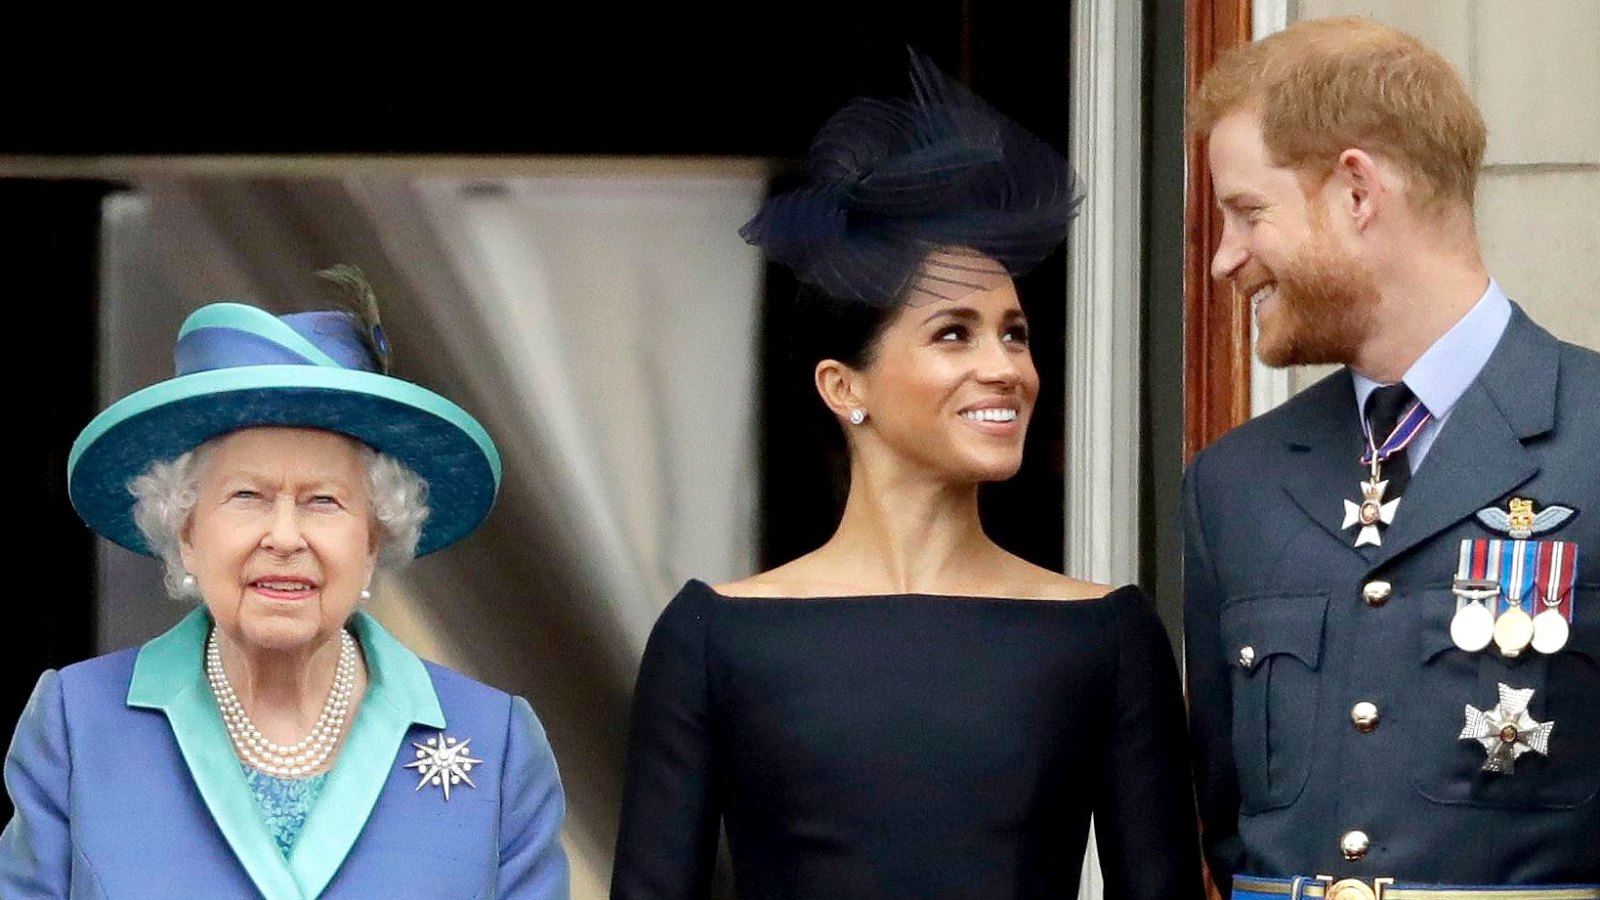 Queen Elizabeth II Almost Stripped Harry Meghan of Another Title